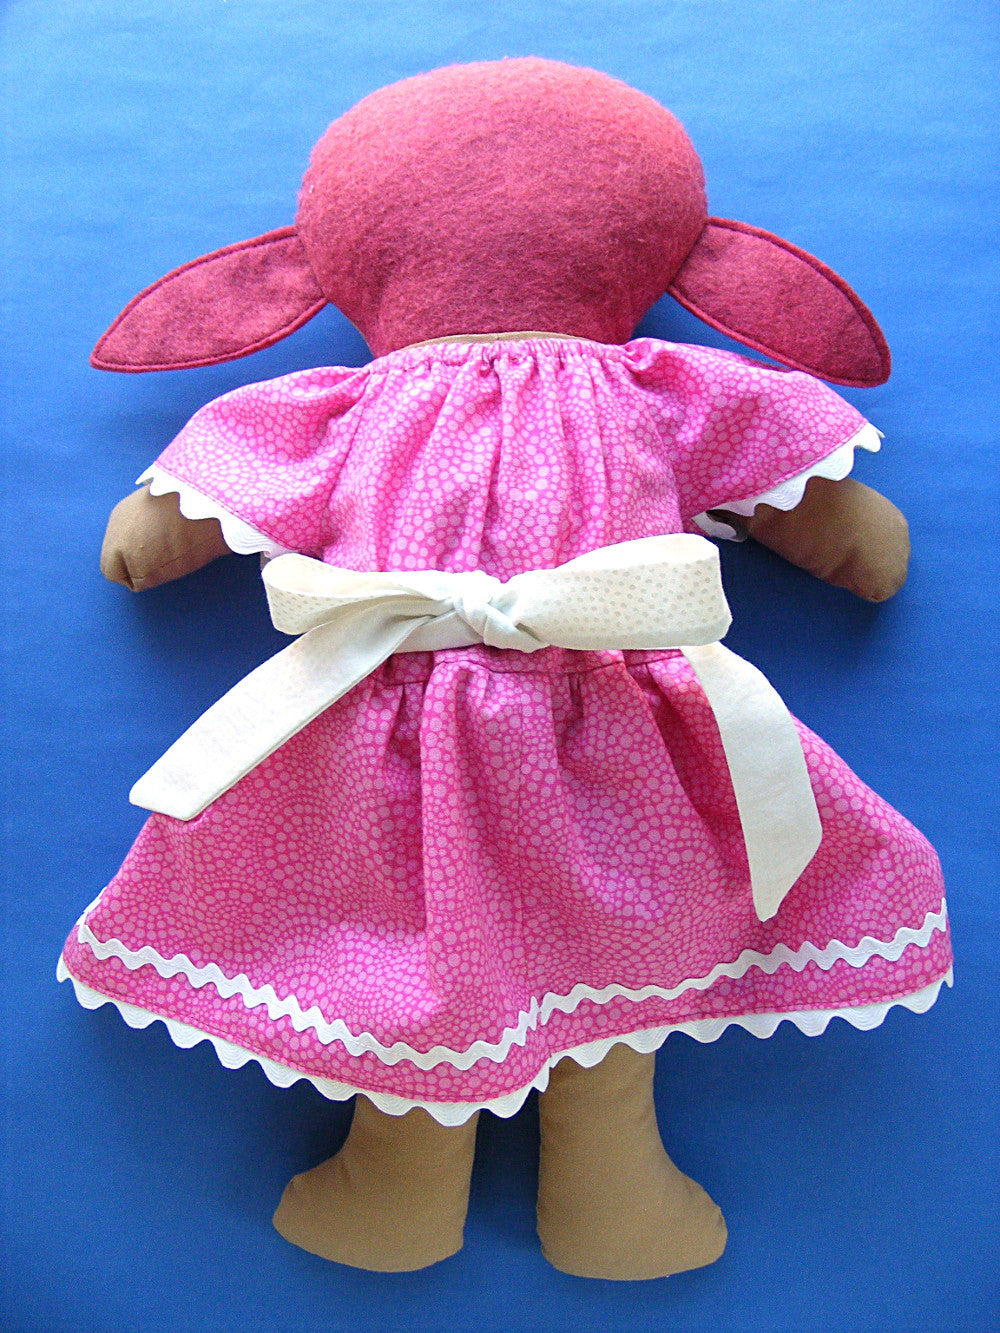 Party Time - dress, party hat and gift bag pattern